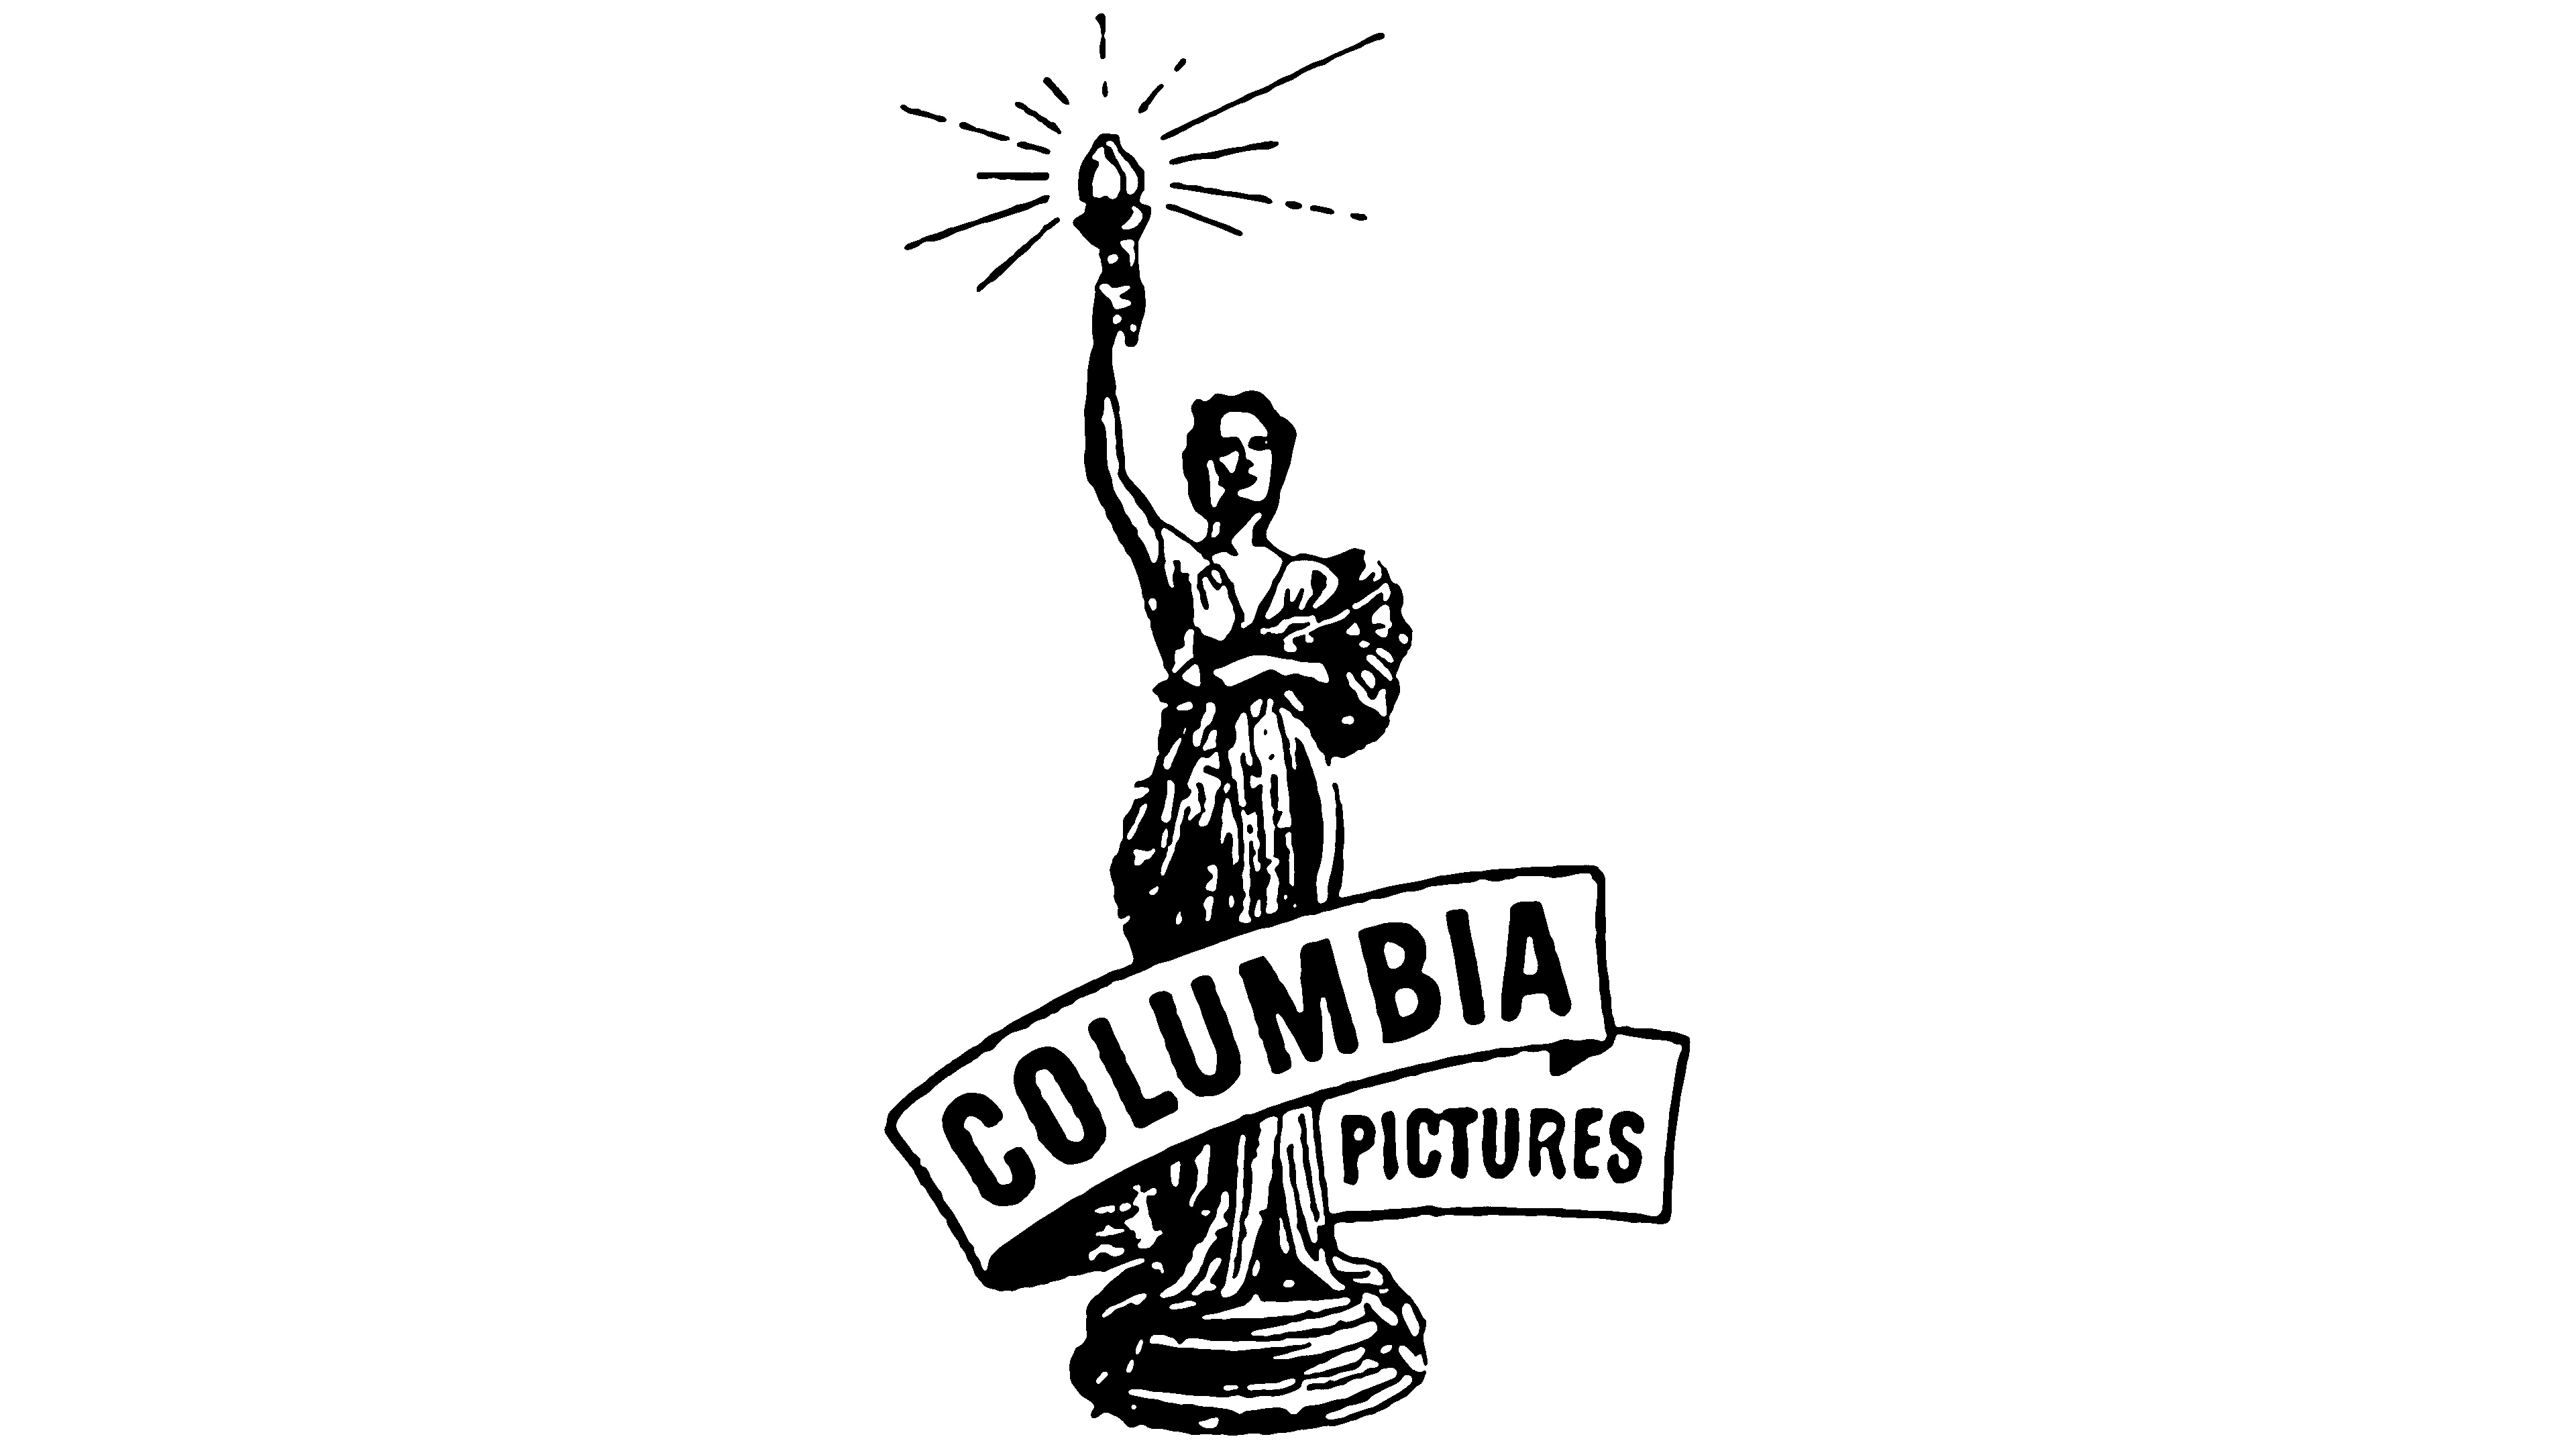 Columbia Pictures movies, Columbia pictures logo, Symbol meaning, History, 3840x2160 4K Desktop